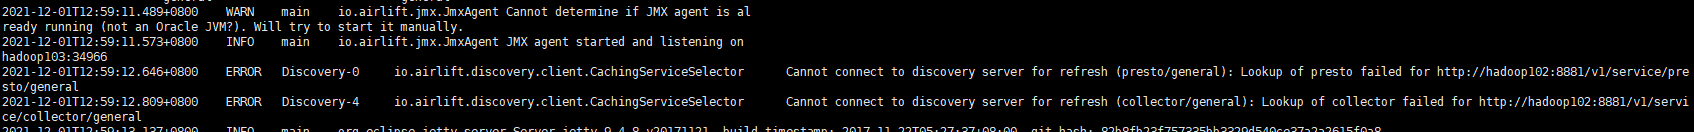 Cannot connect to discovery server for announce: Announcement failed for http://hadoop102:8881